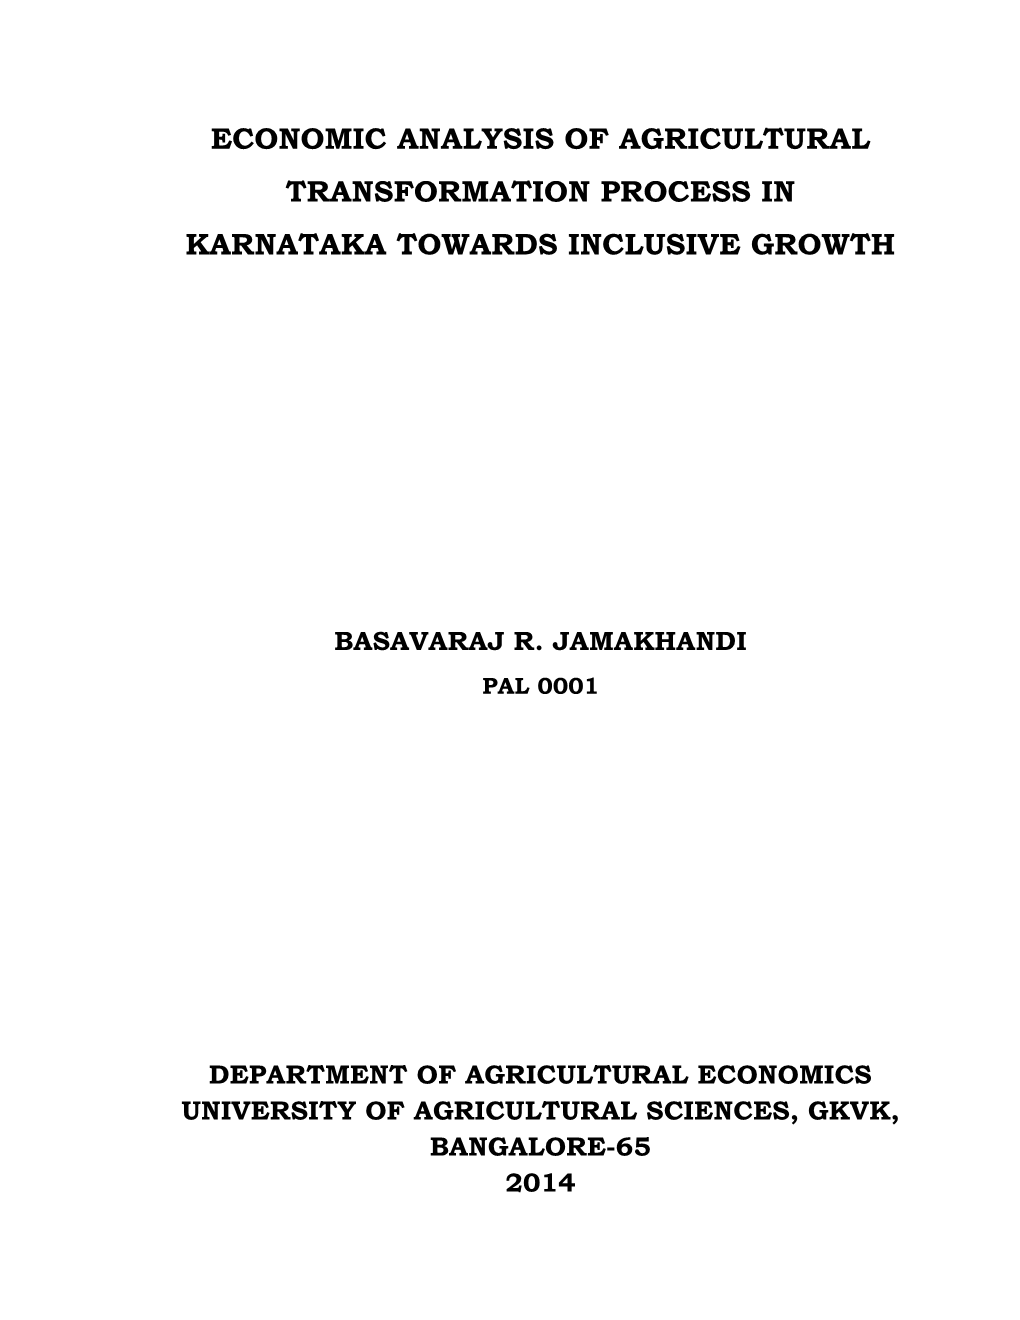 Economic Analysis of Agricultural Transformation Process in Karnataka Towards Inclusive Growth